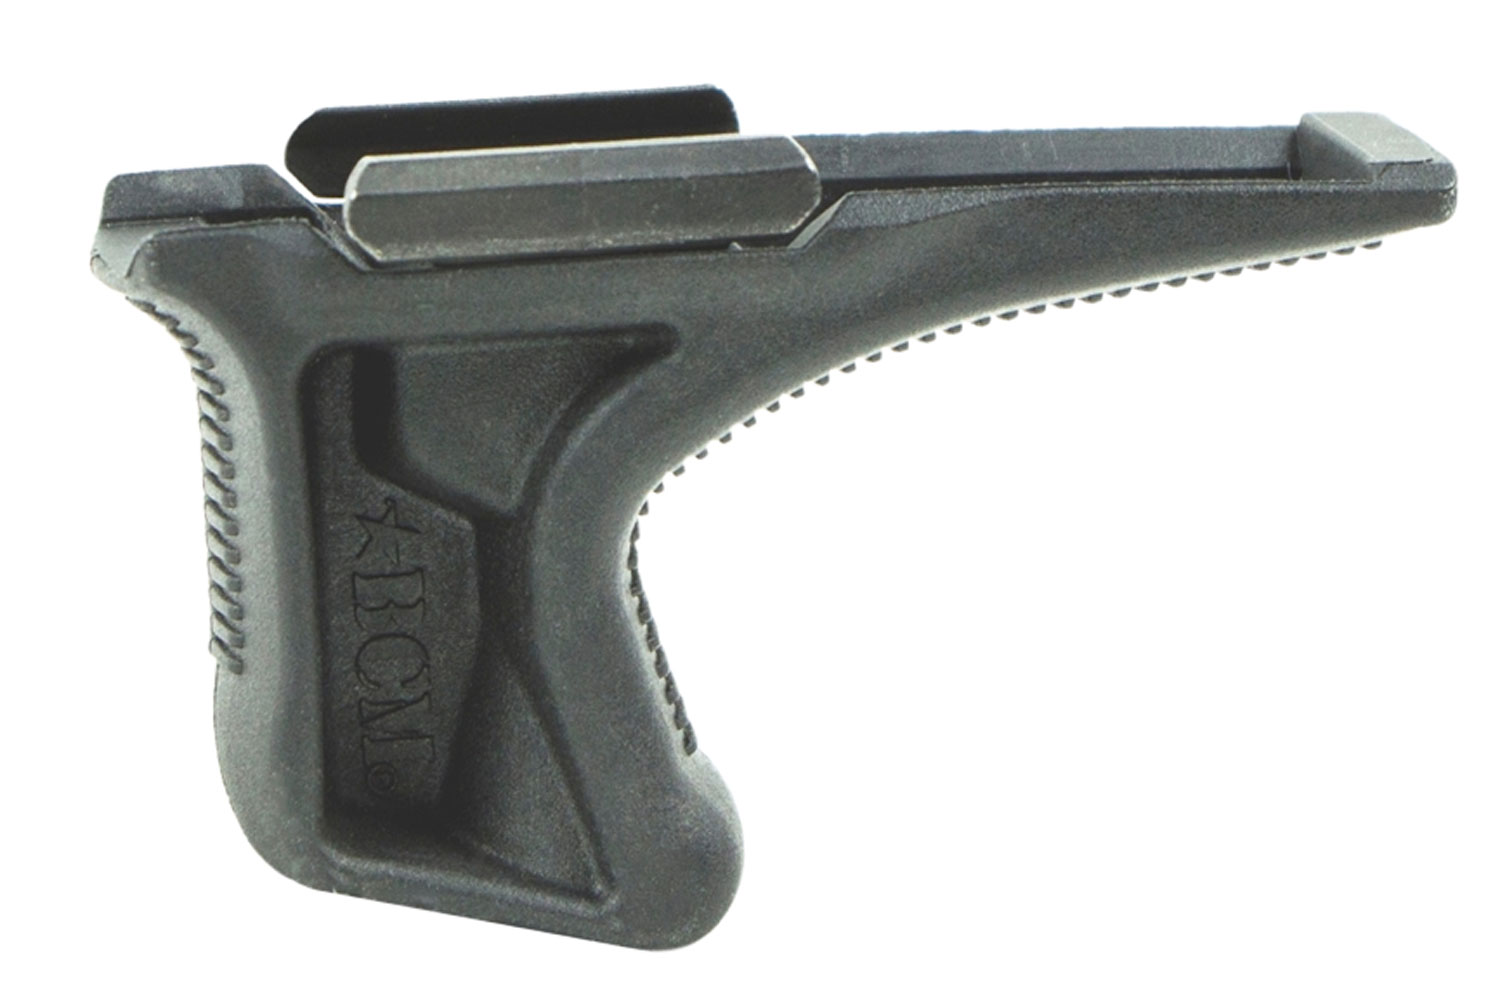 BCM KAG1913BLK BCMGunfighter Kinesthetic Angled Grip Made of Polymer With Black Textured Finish for Picatinny Rail